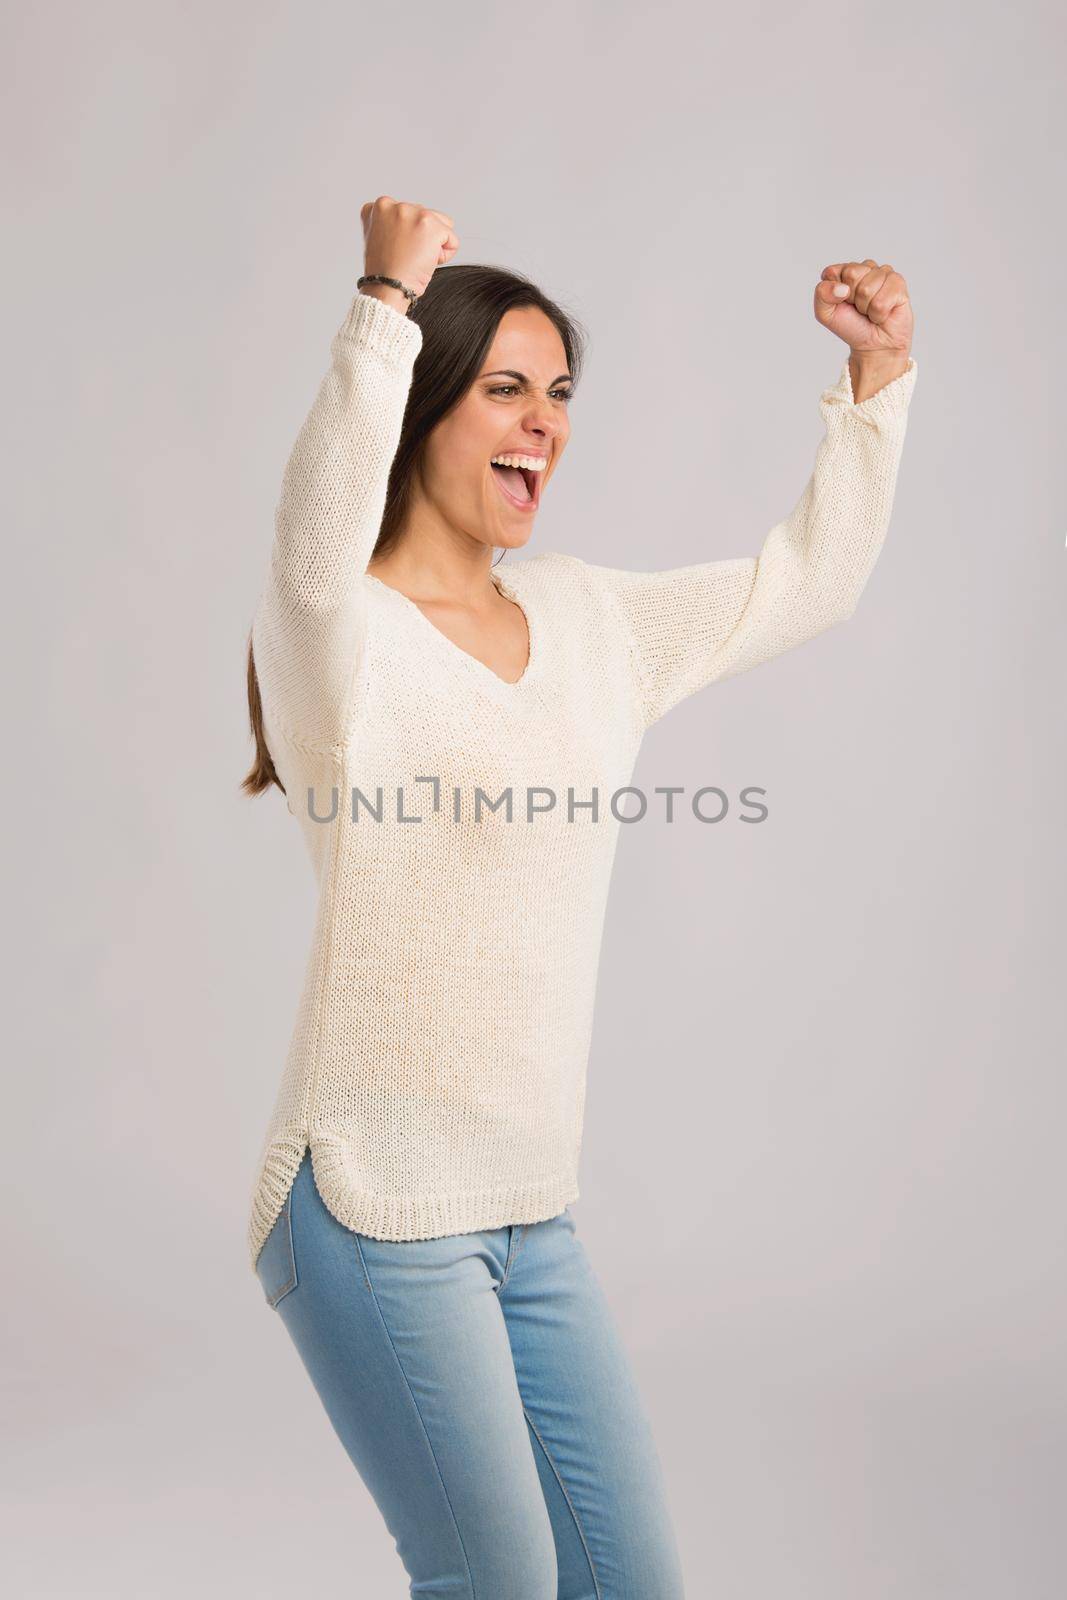 Studio shot of a happy young woman with arms raised